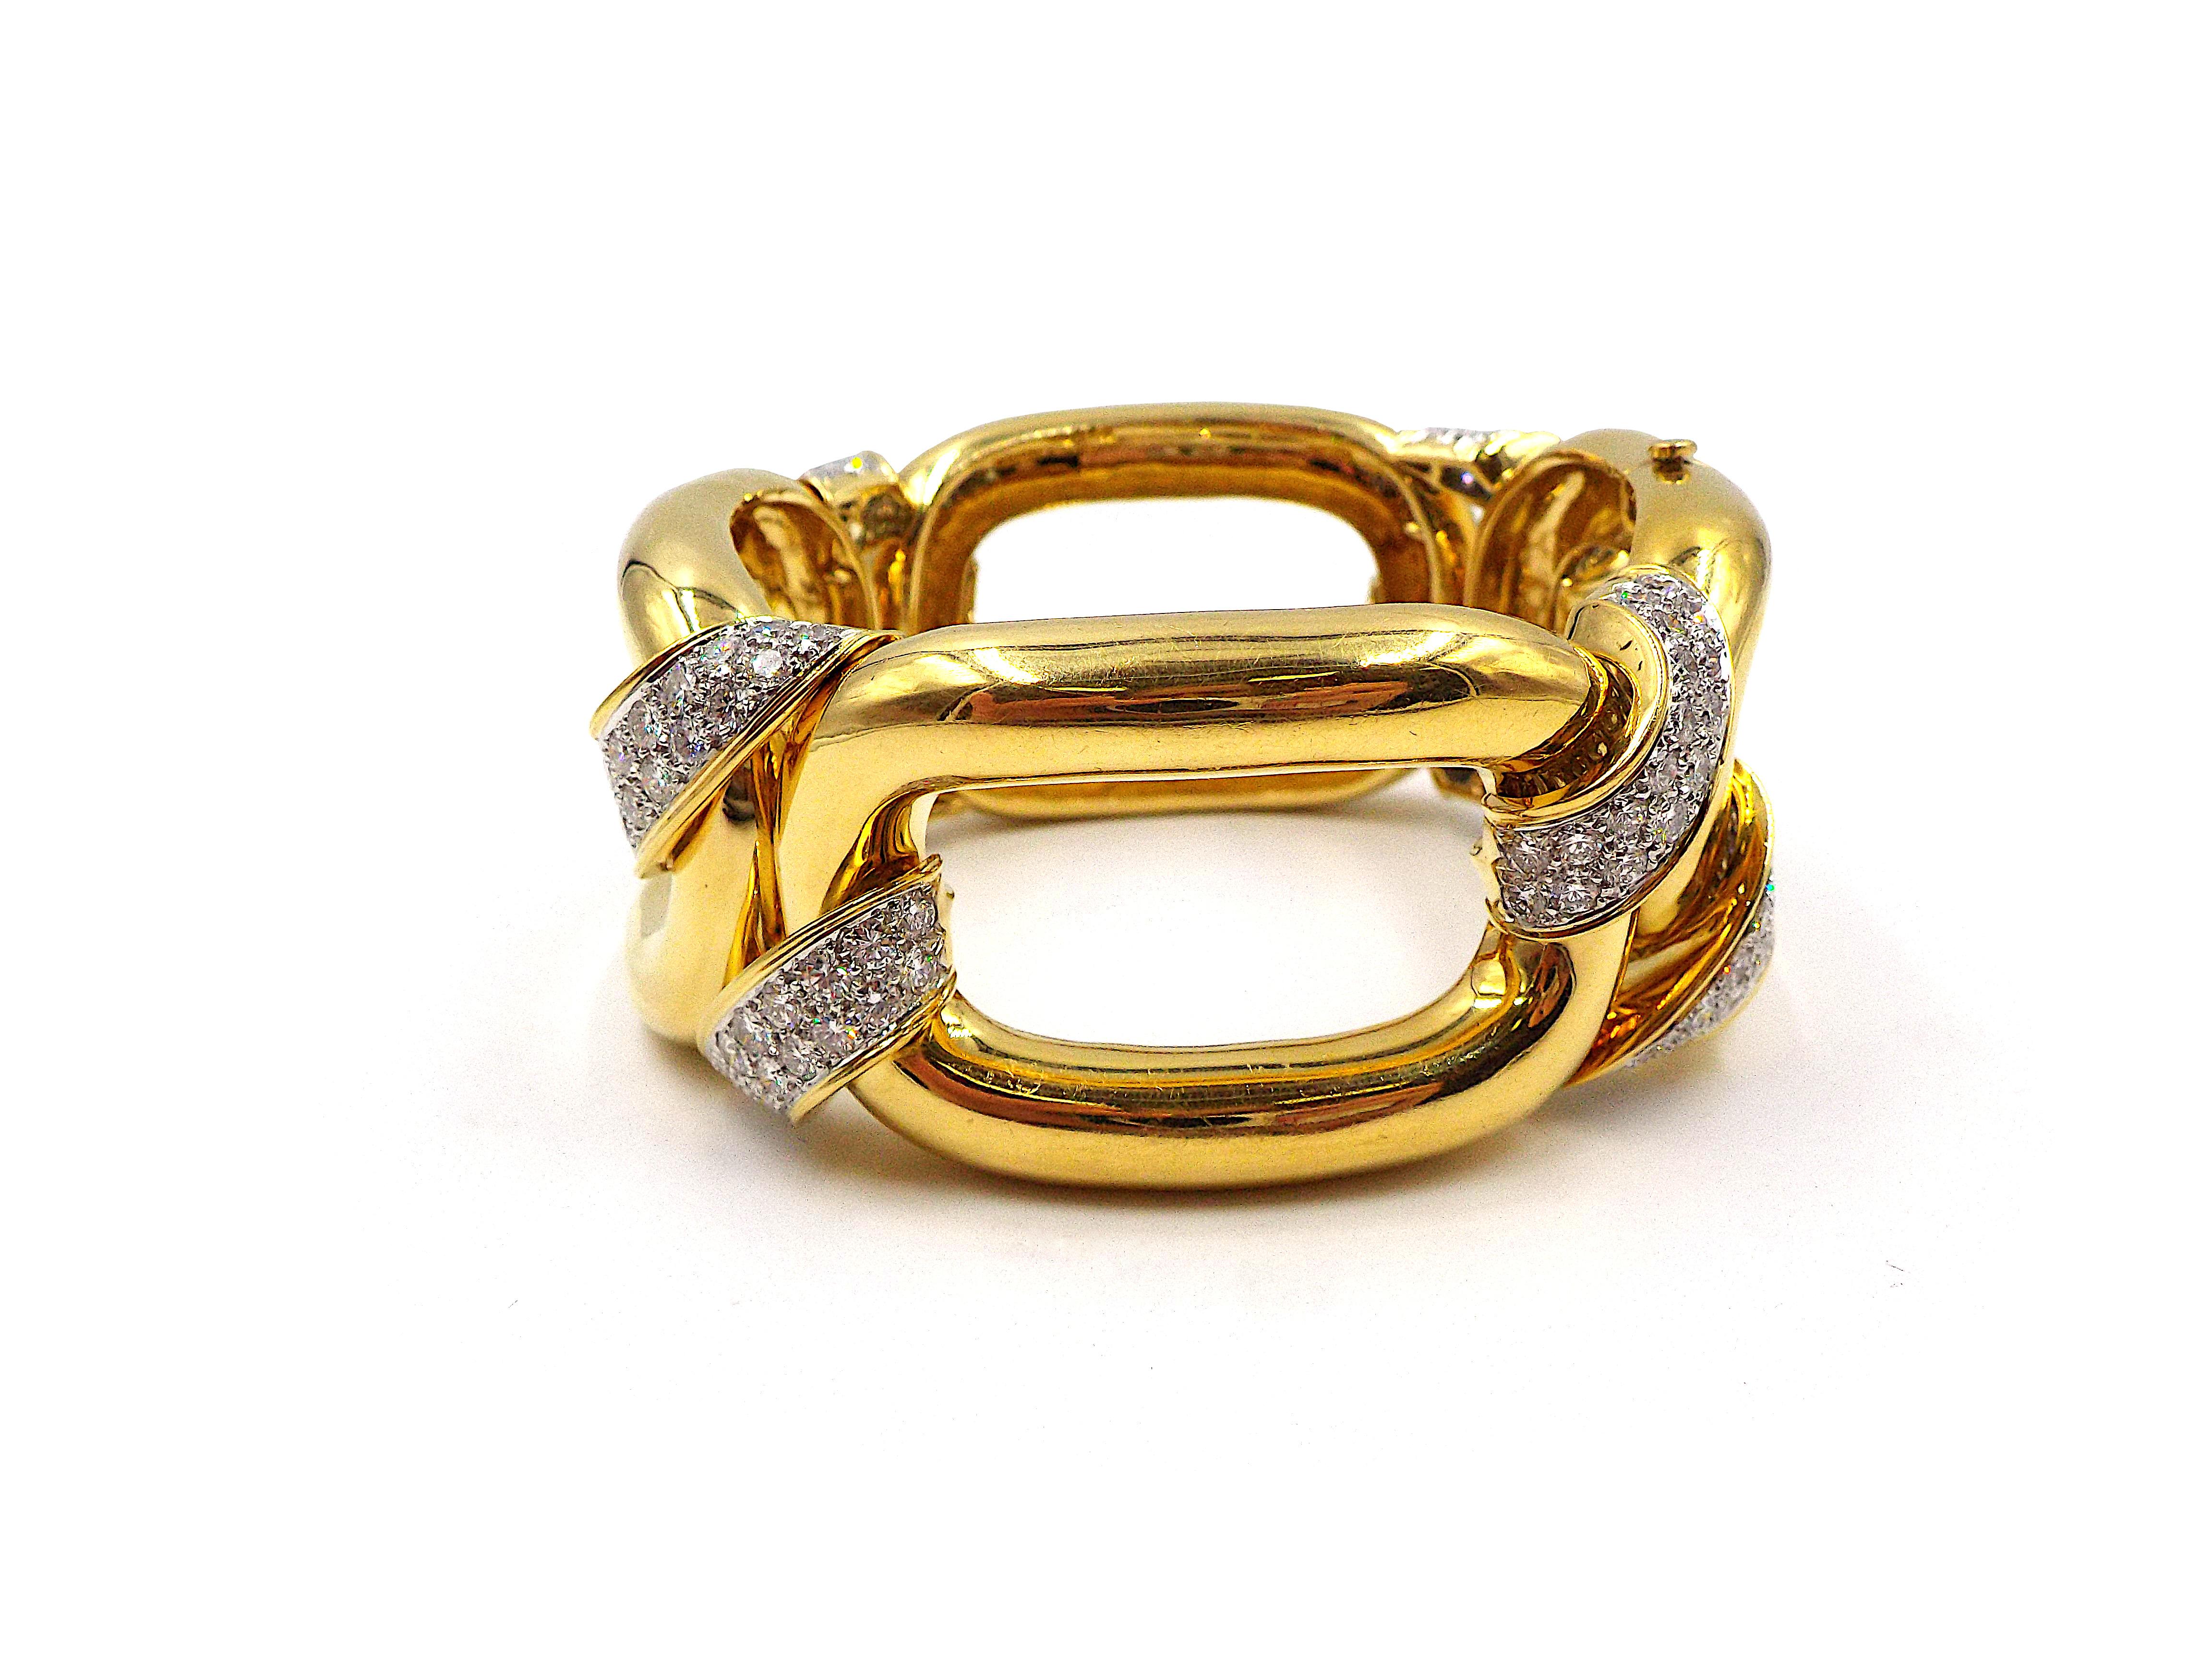 A chic and stylish statement bracelet by David Webb. Performed in 18K yellow gold and platinum, designed as a series of oversized links connected by platinum segments inlaid with ap. 8ct of diamonds. Signed David Webb, stamped 18K PLAT. Inner